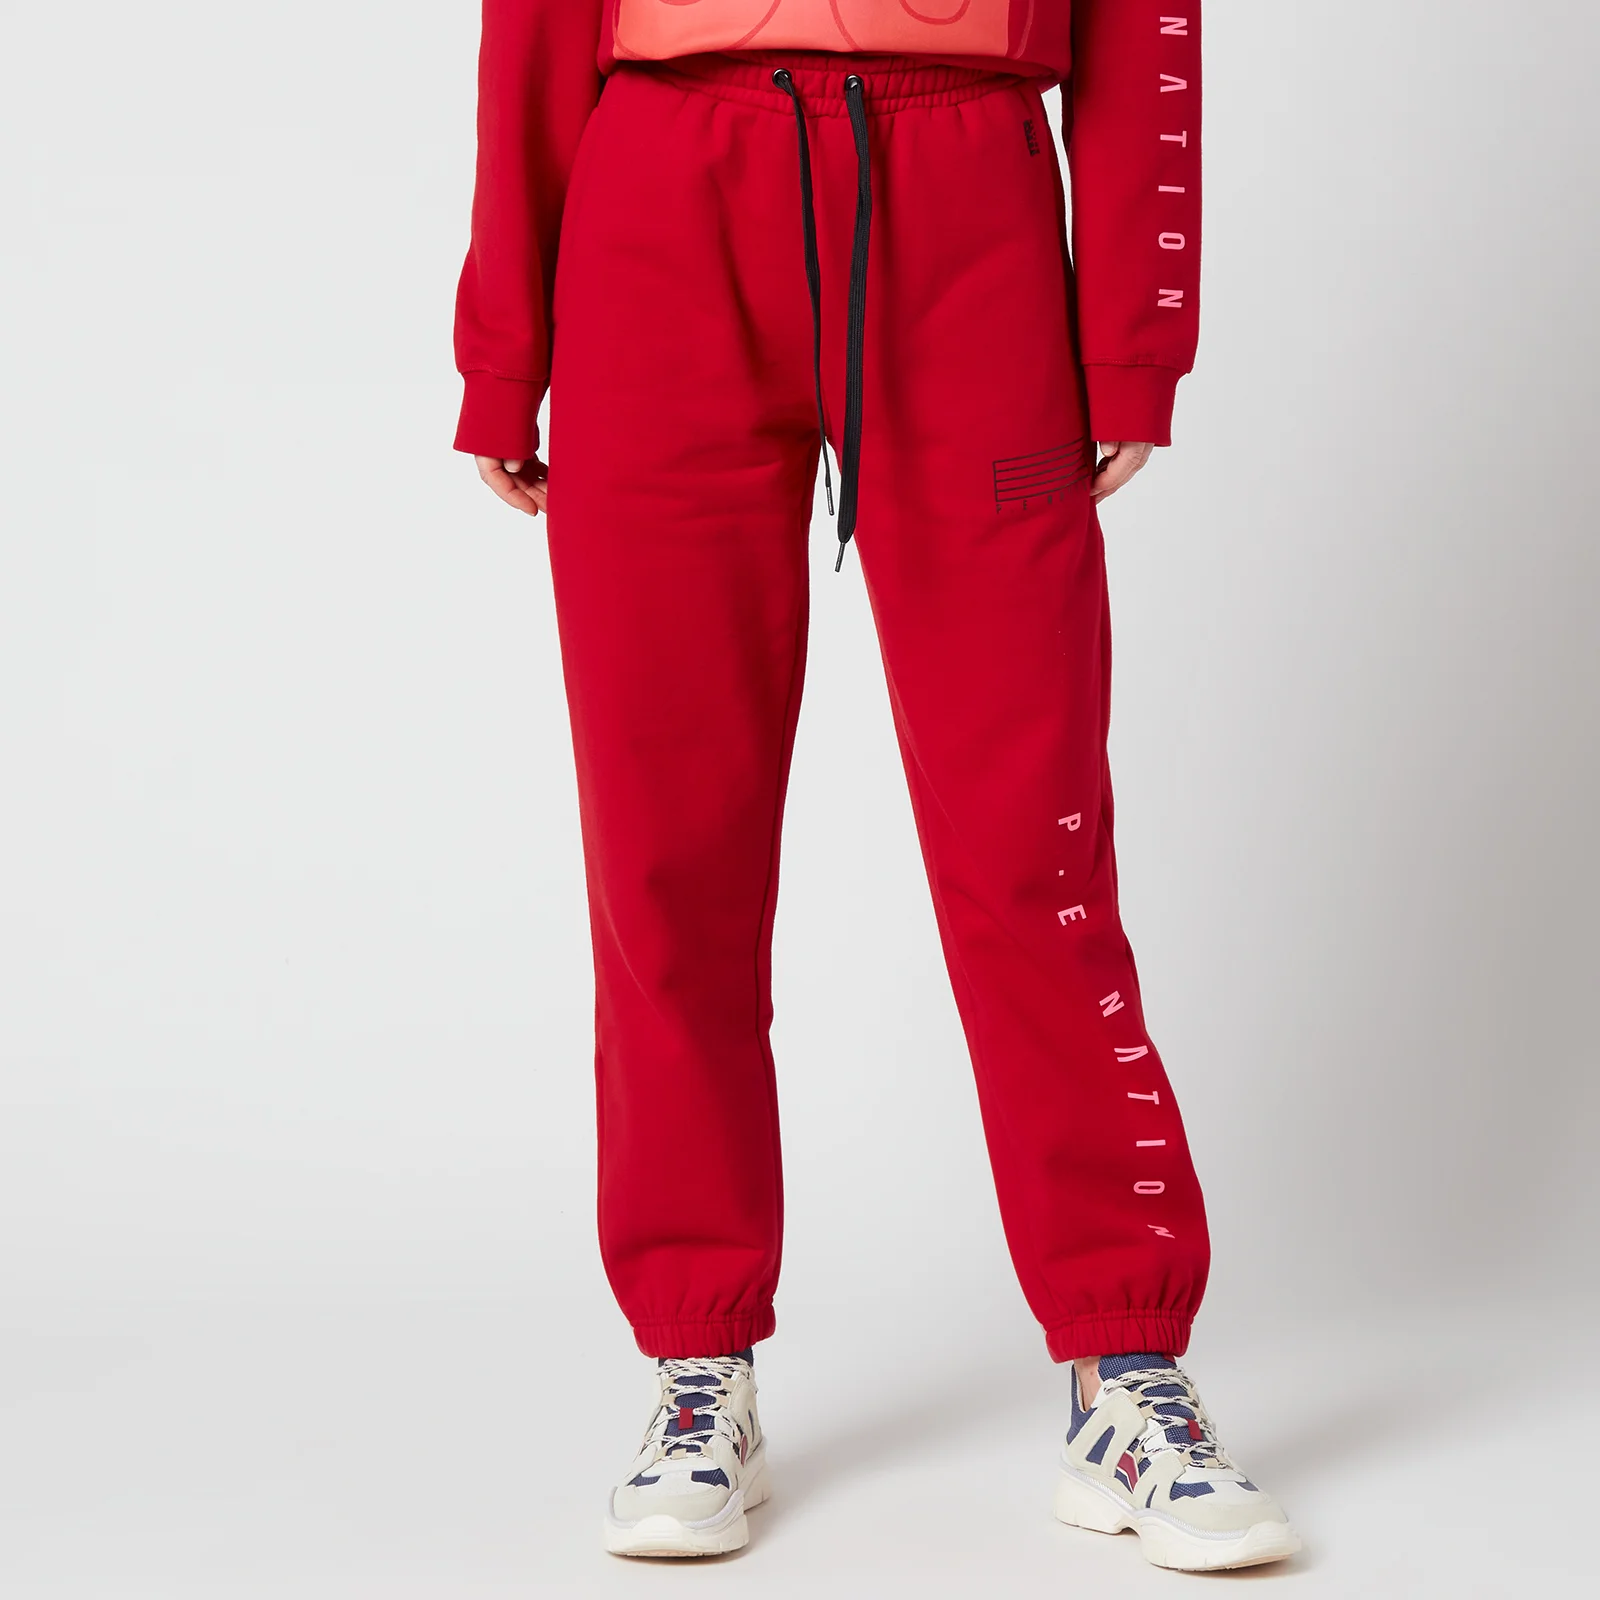 P.E Nation Women's Courtside Trackpants - Chilli Pepper Red Image 1